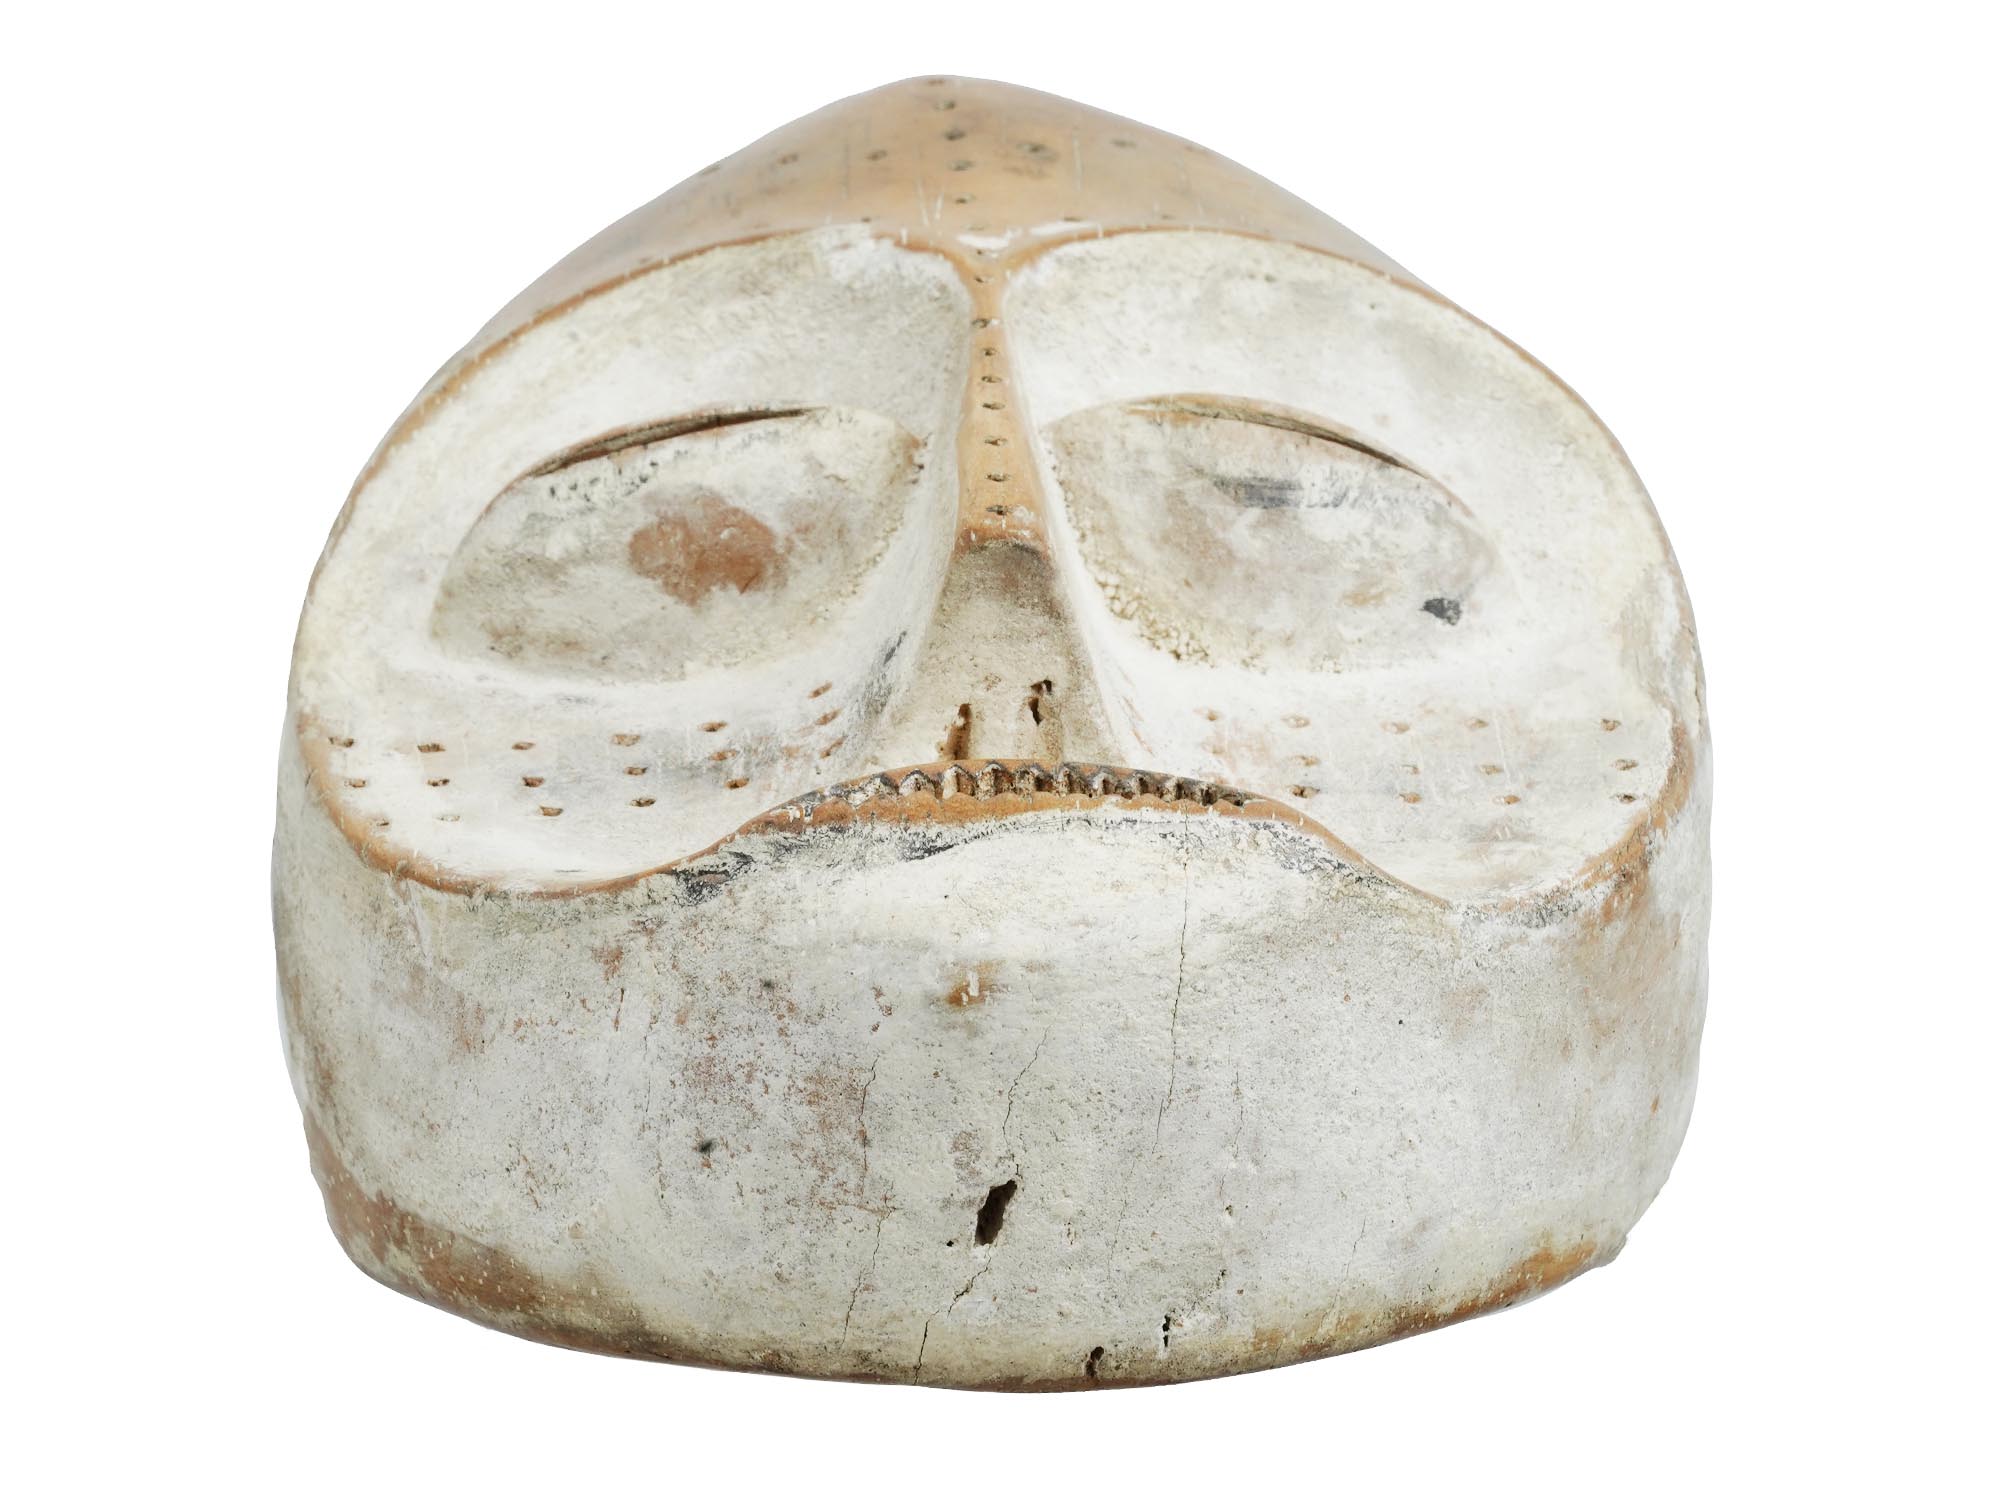 CENTRAL AFRICAN CONGO LEGA BWAMI WOODEN MASK PIC-5